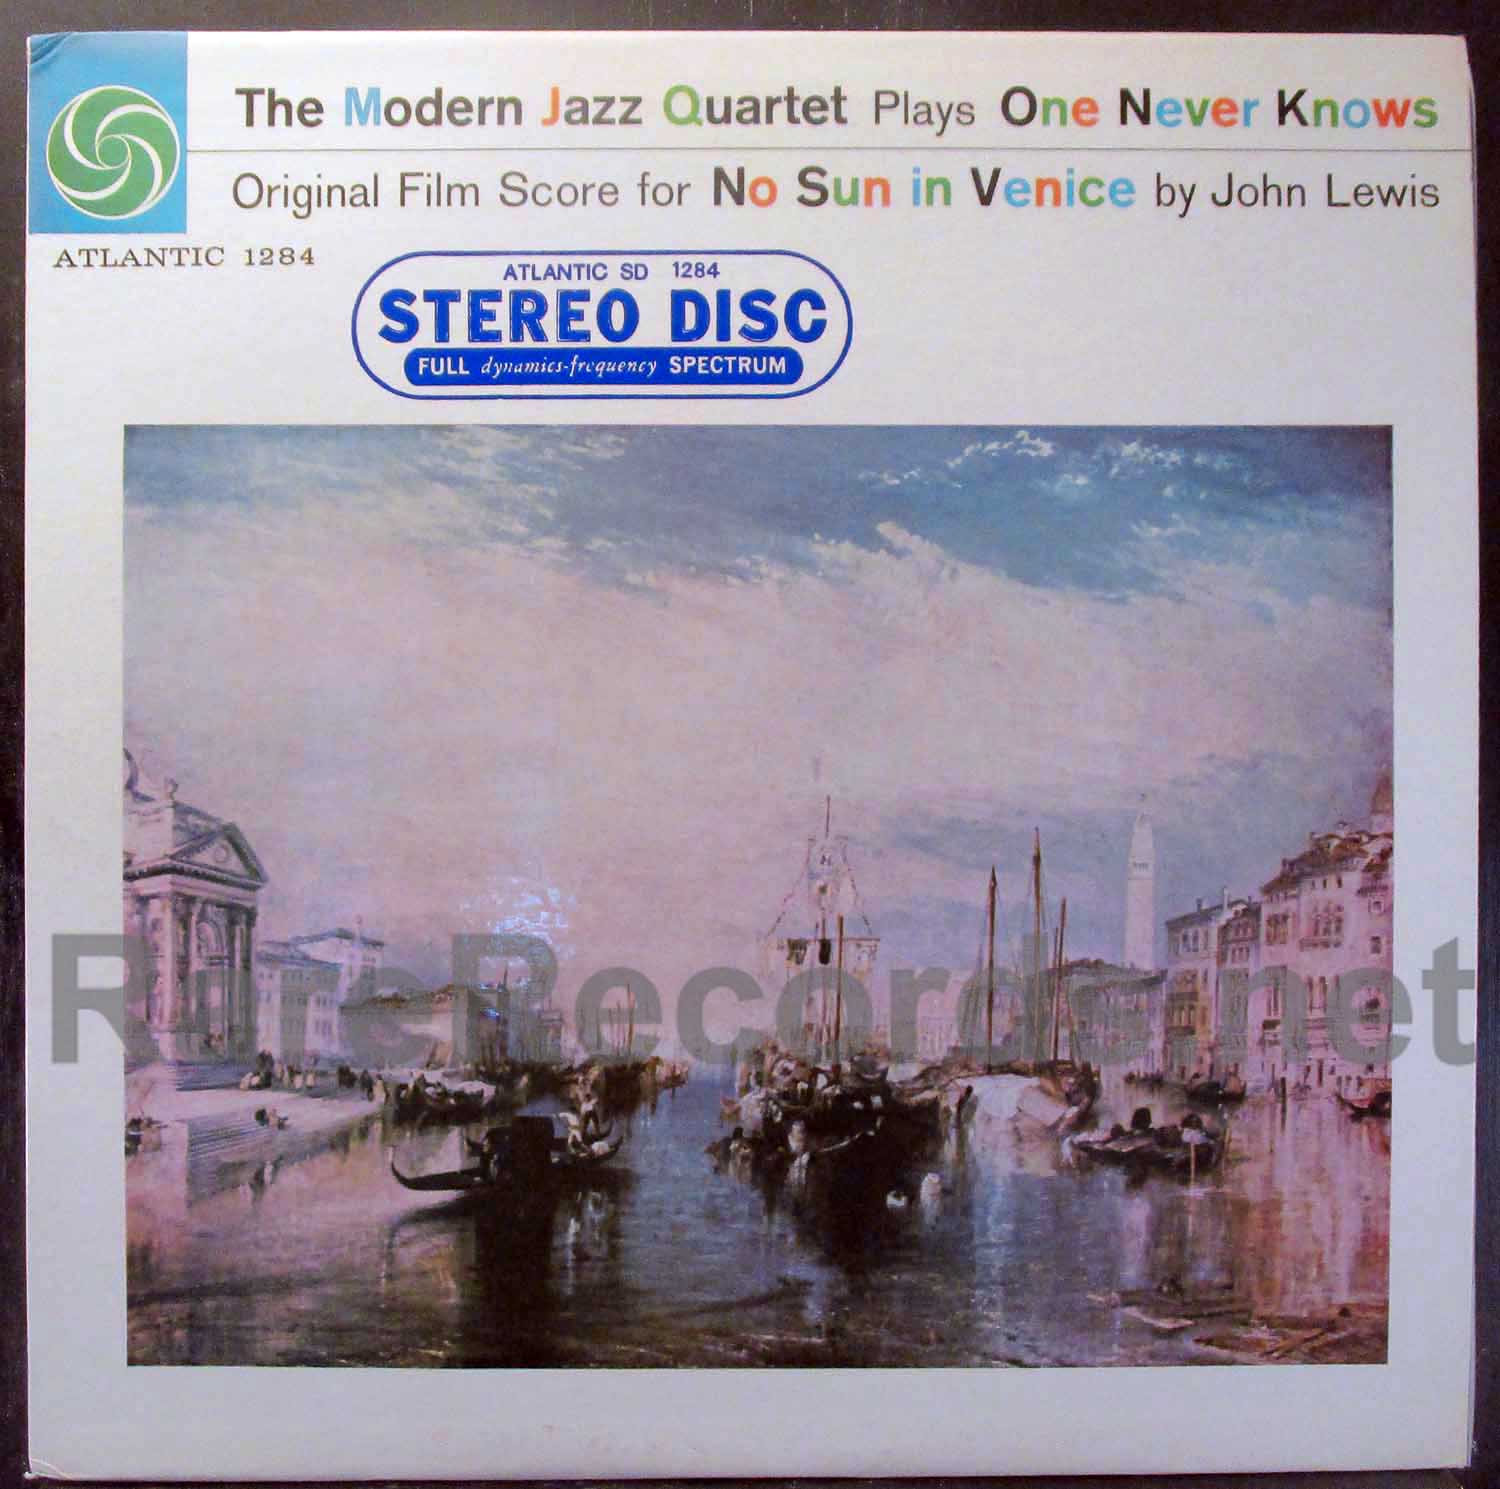 The Modern Jazz Quartet Plays One Never Knows u.s. stereo LP